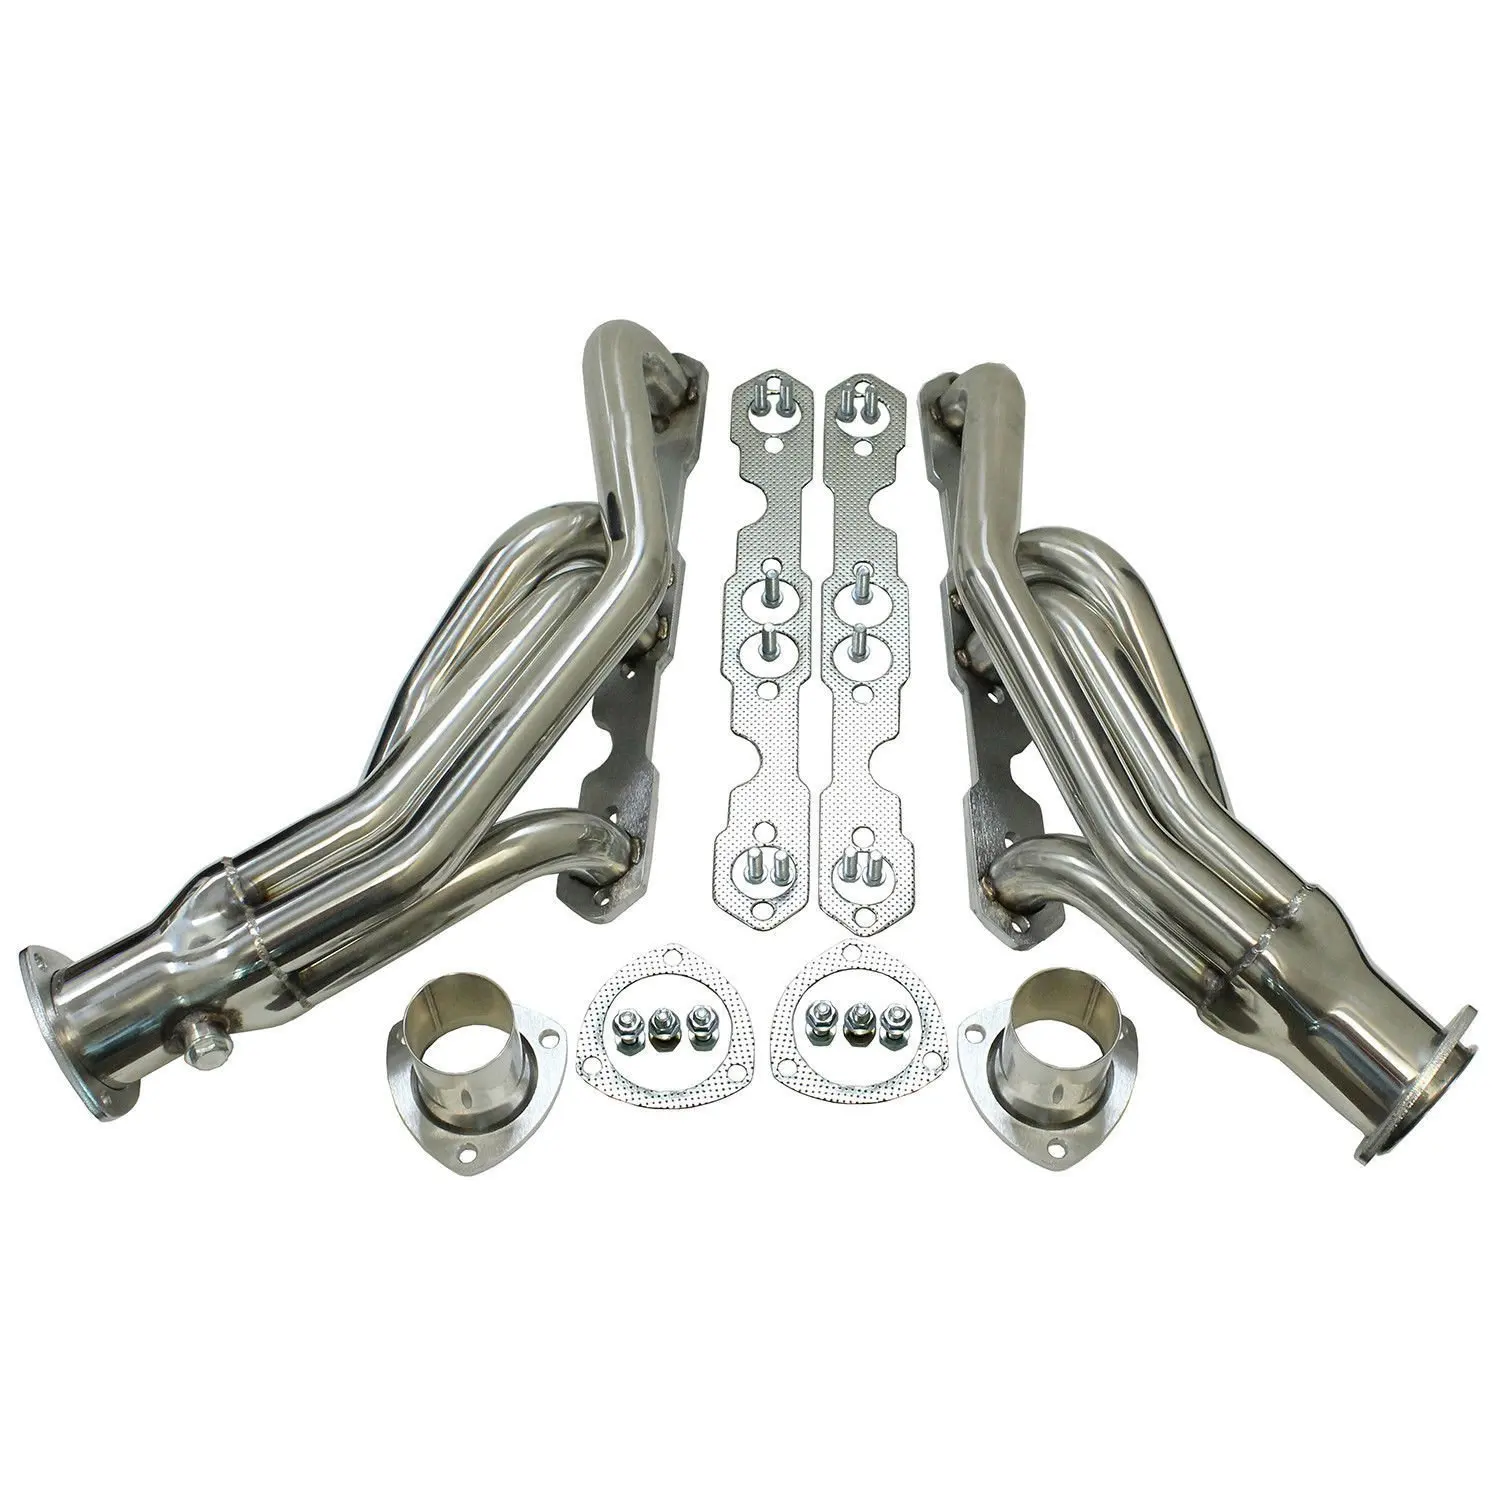 Chevy SBC 350 Pickup 1988-95 Stainless Steel Exhaust Headers.